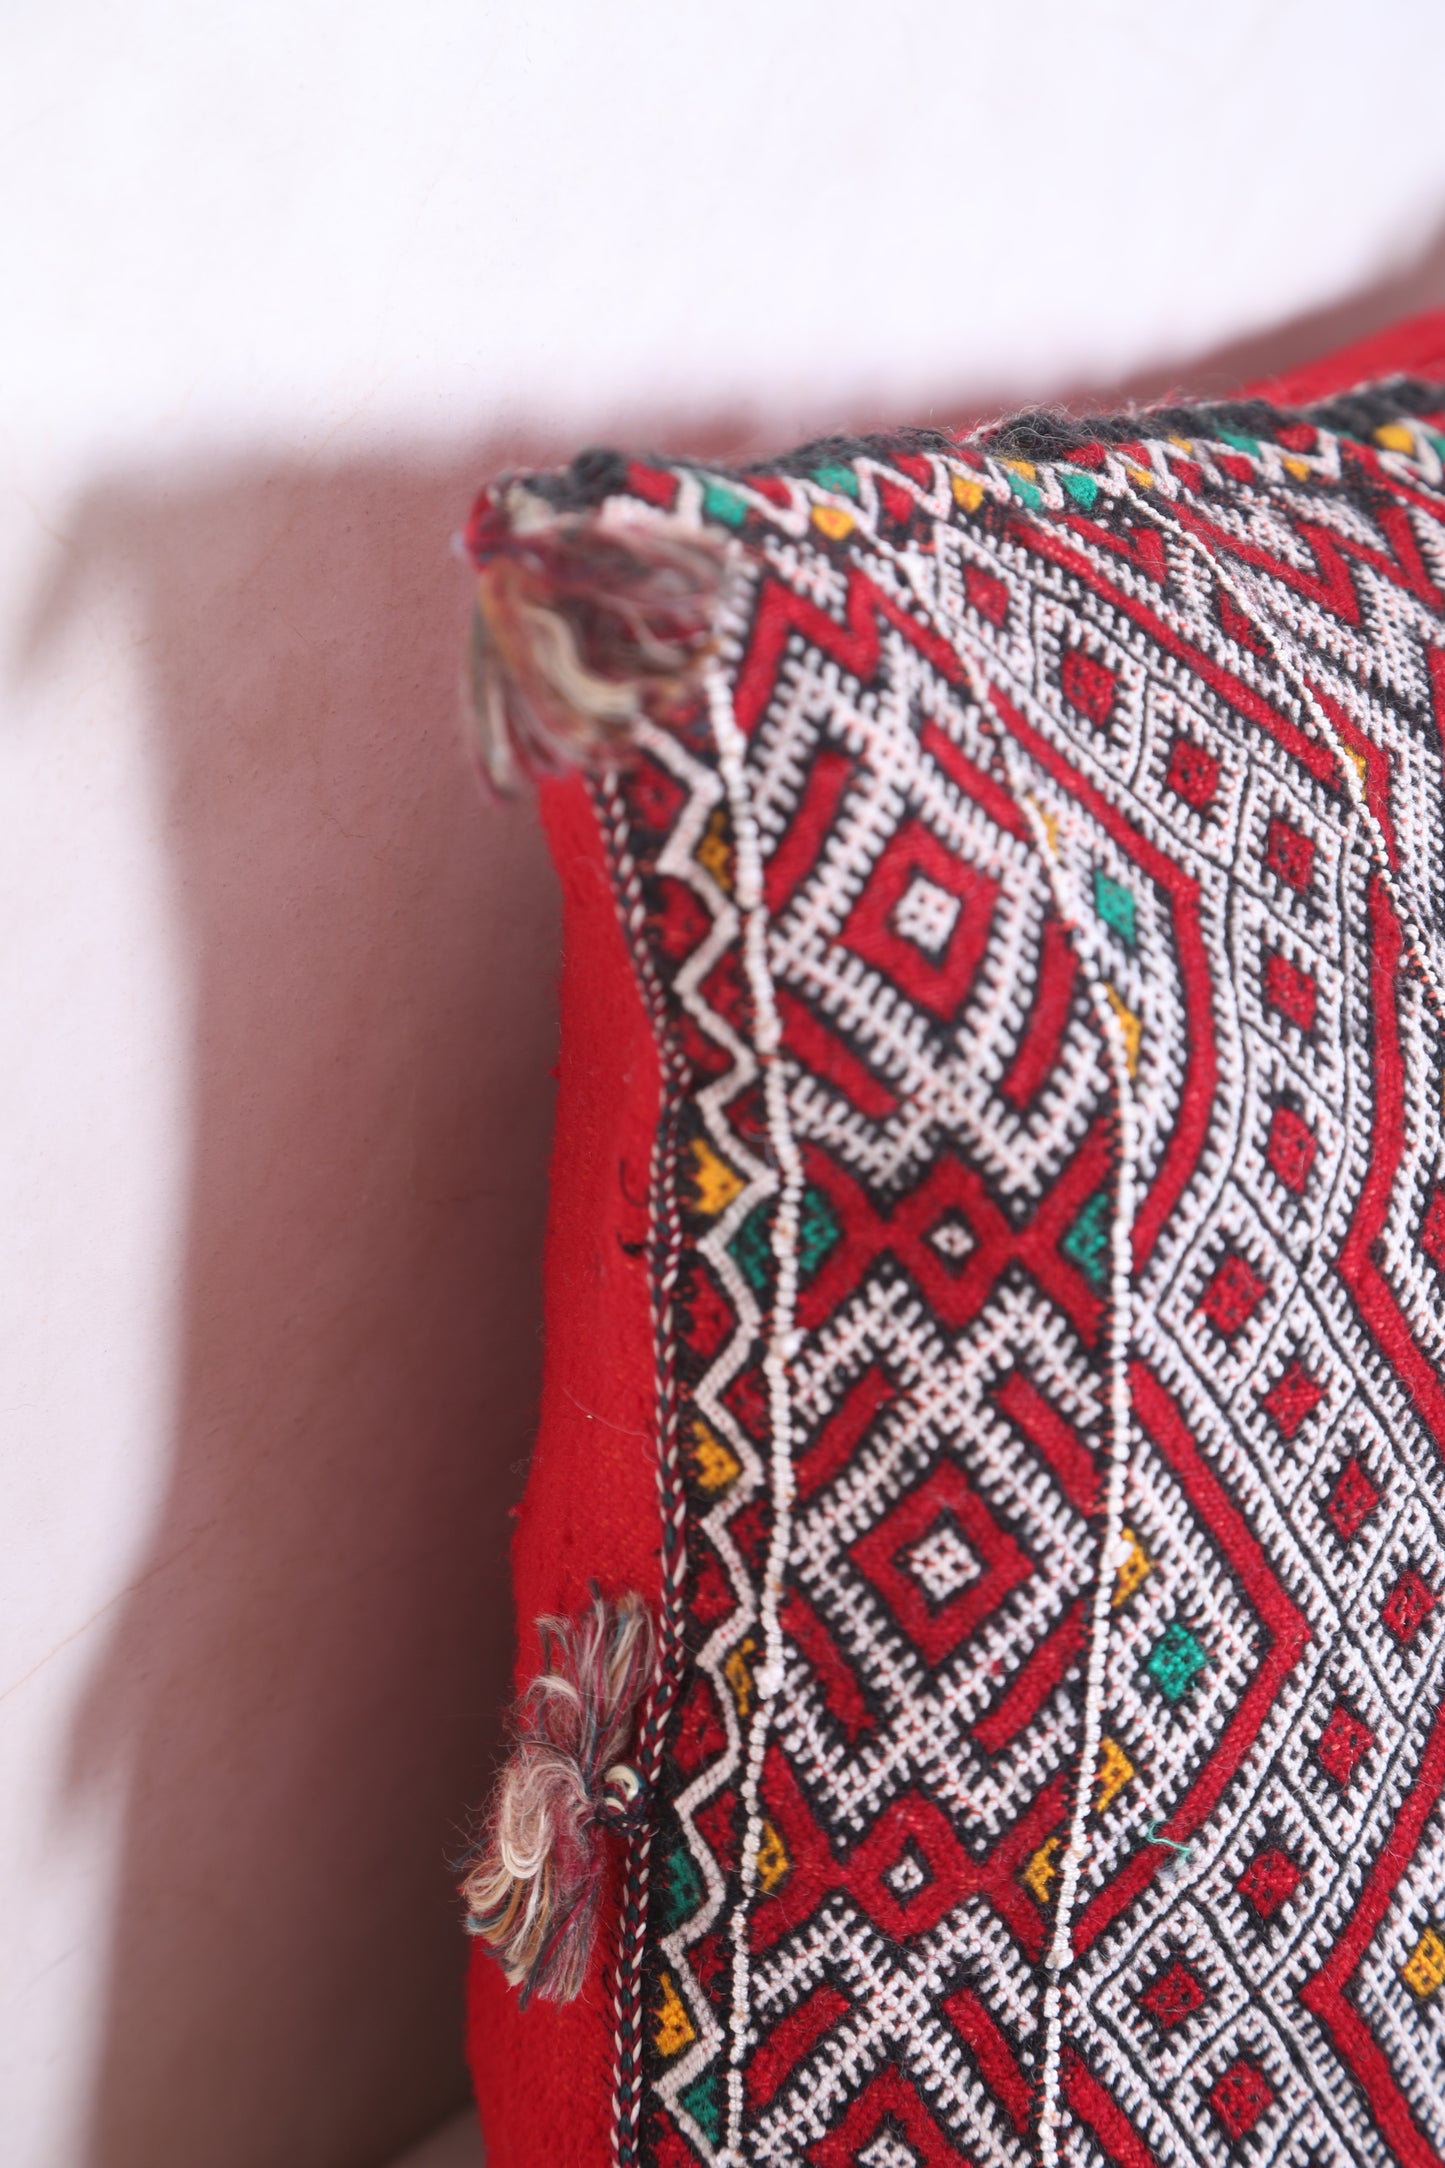 Moroccan handmade kilim pillow 15.7 INCHES X 18.5 INCHES